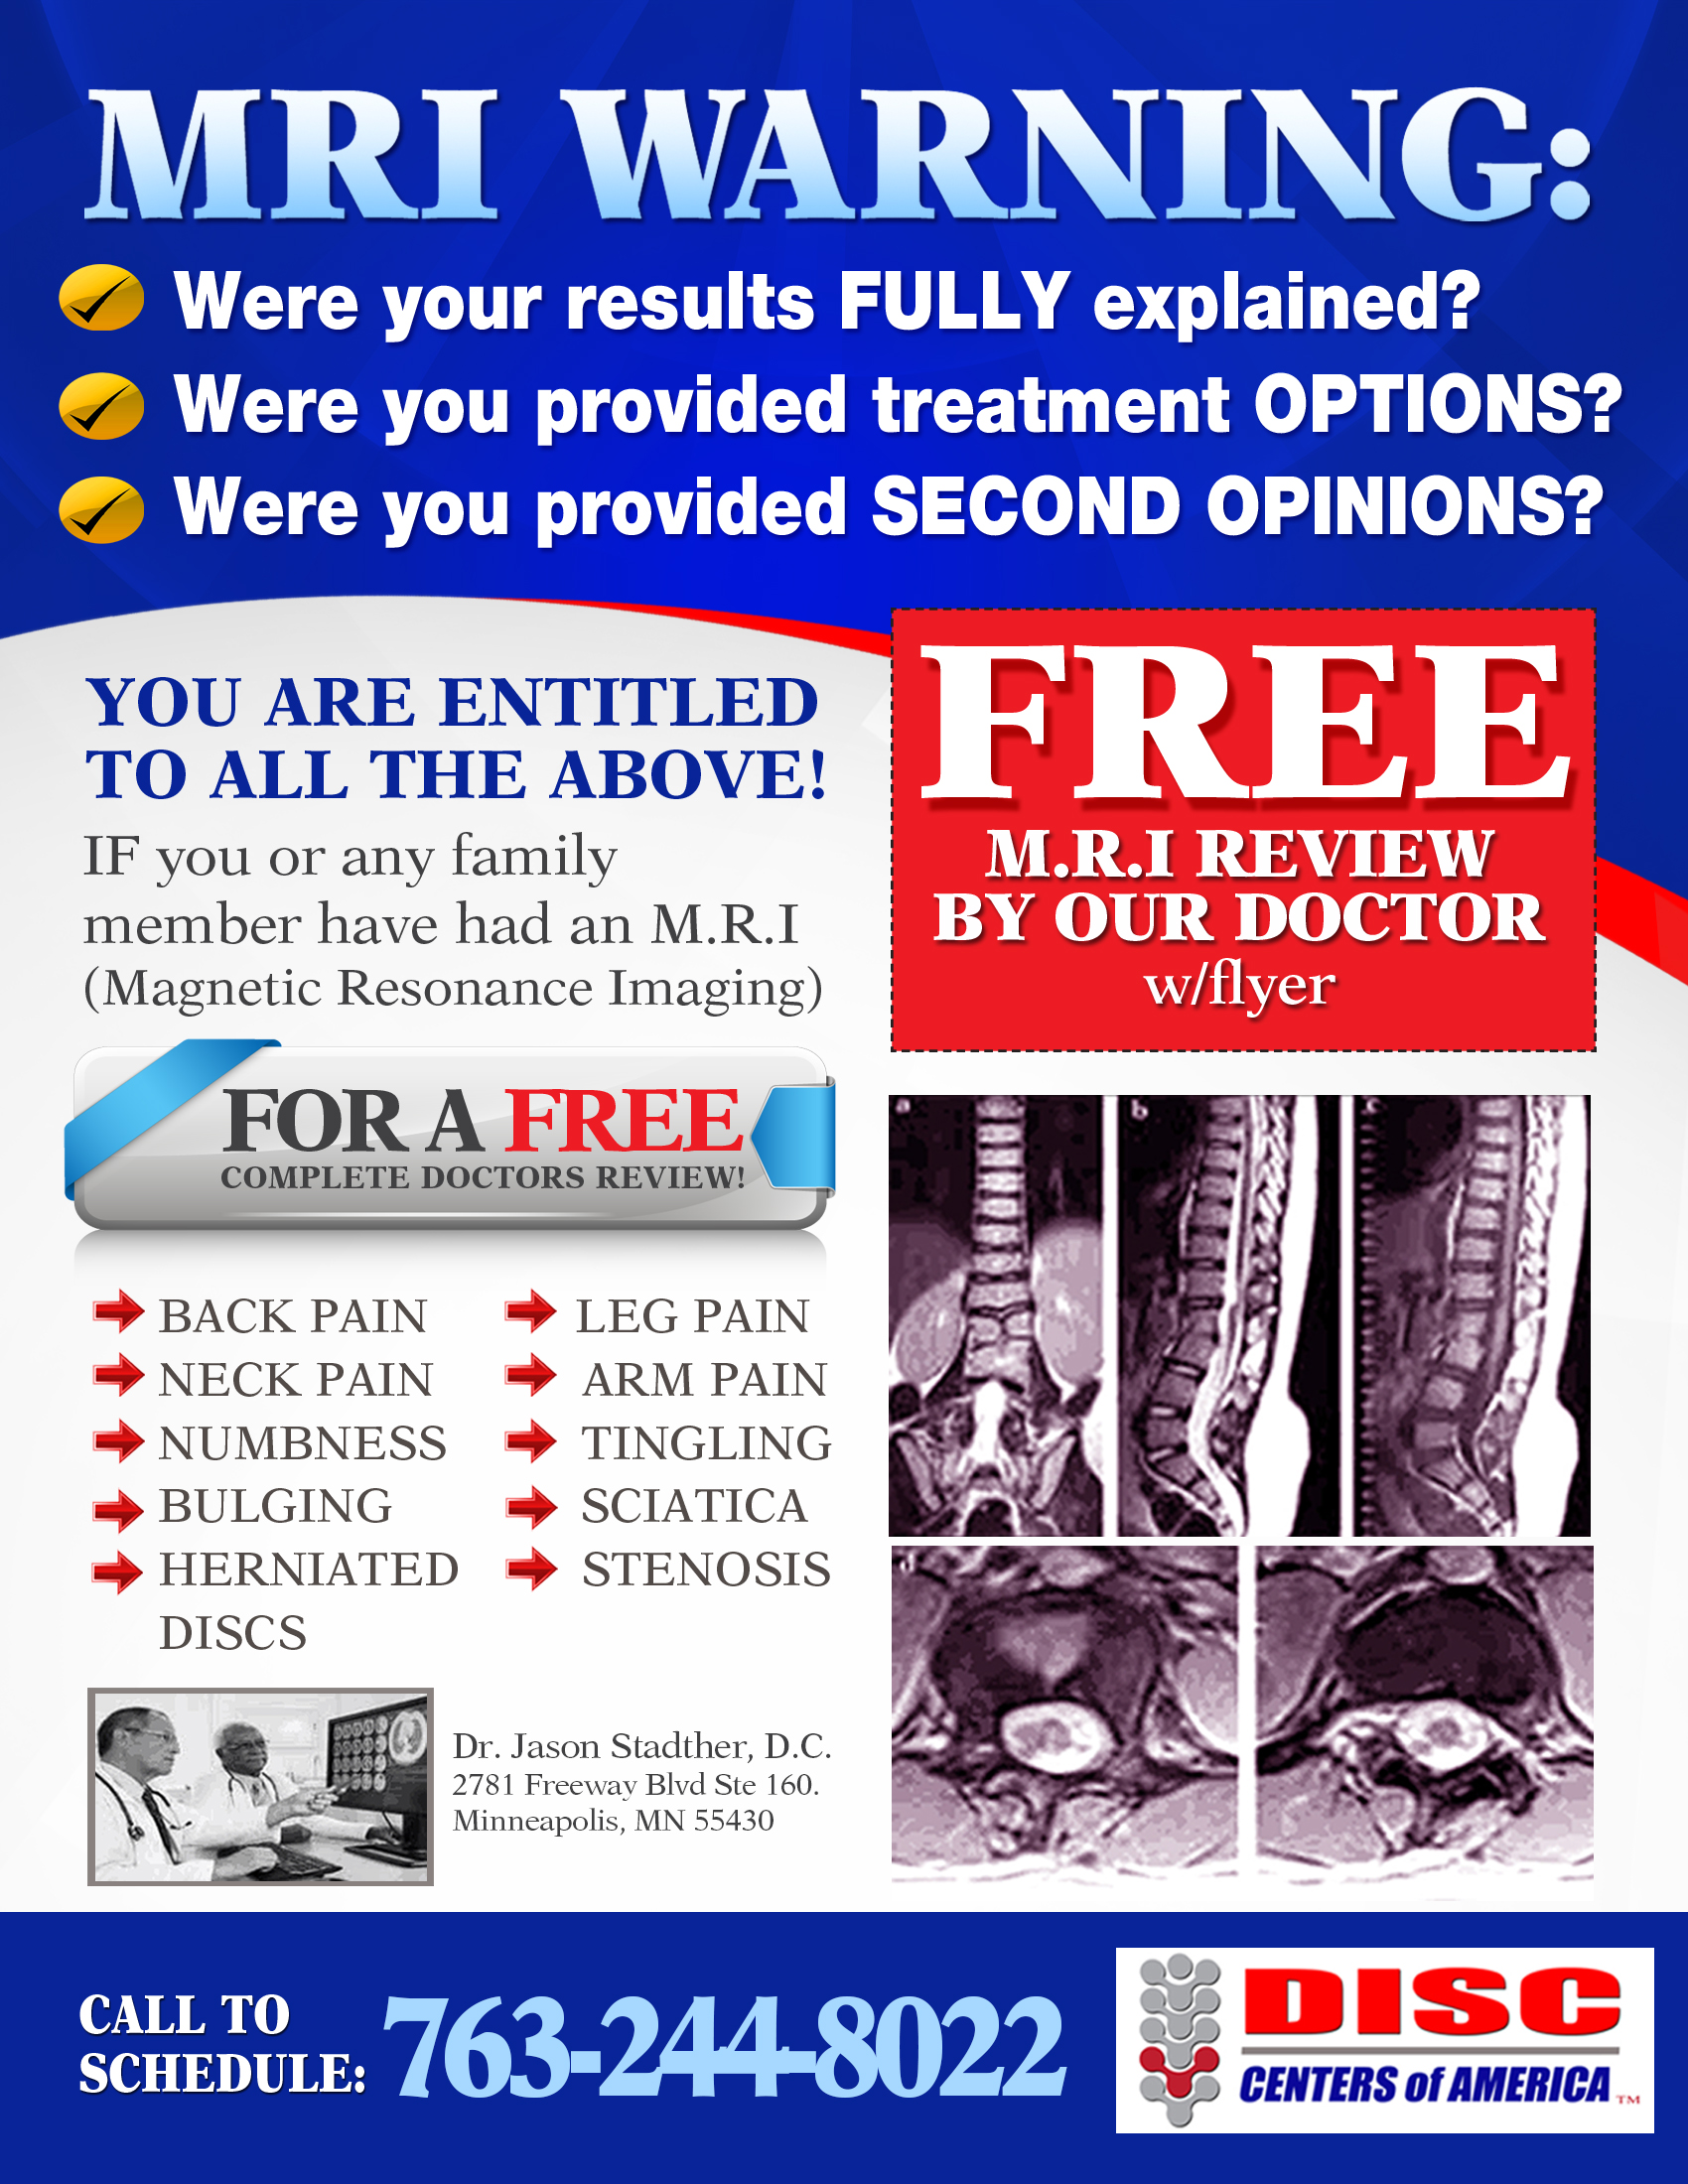 Jason Stadther DC - Free MRI review - Disc Centers of America